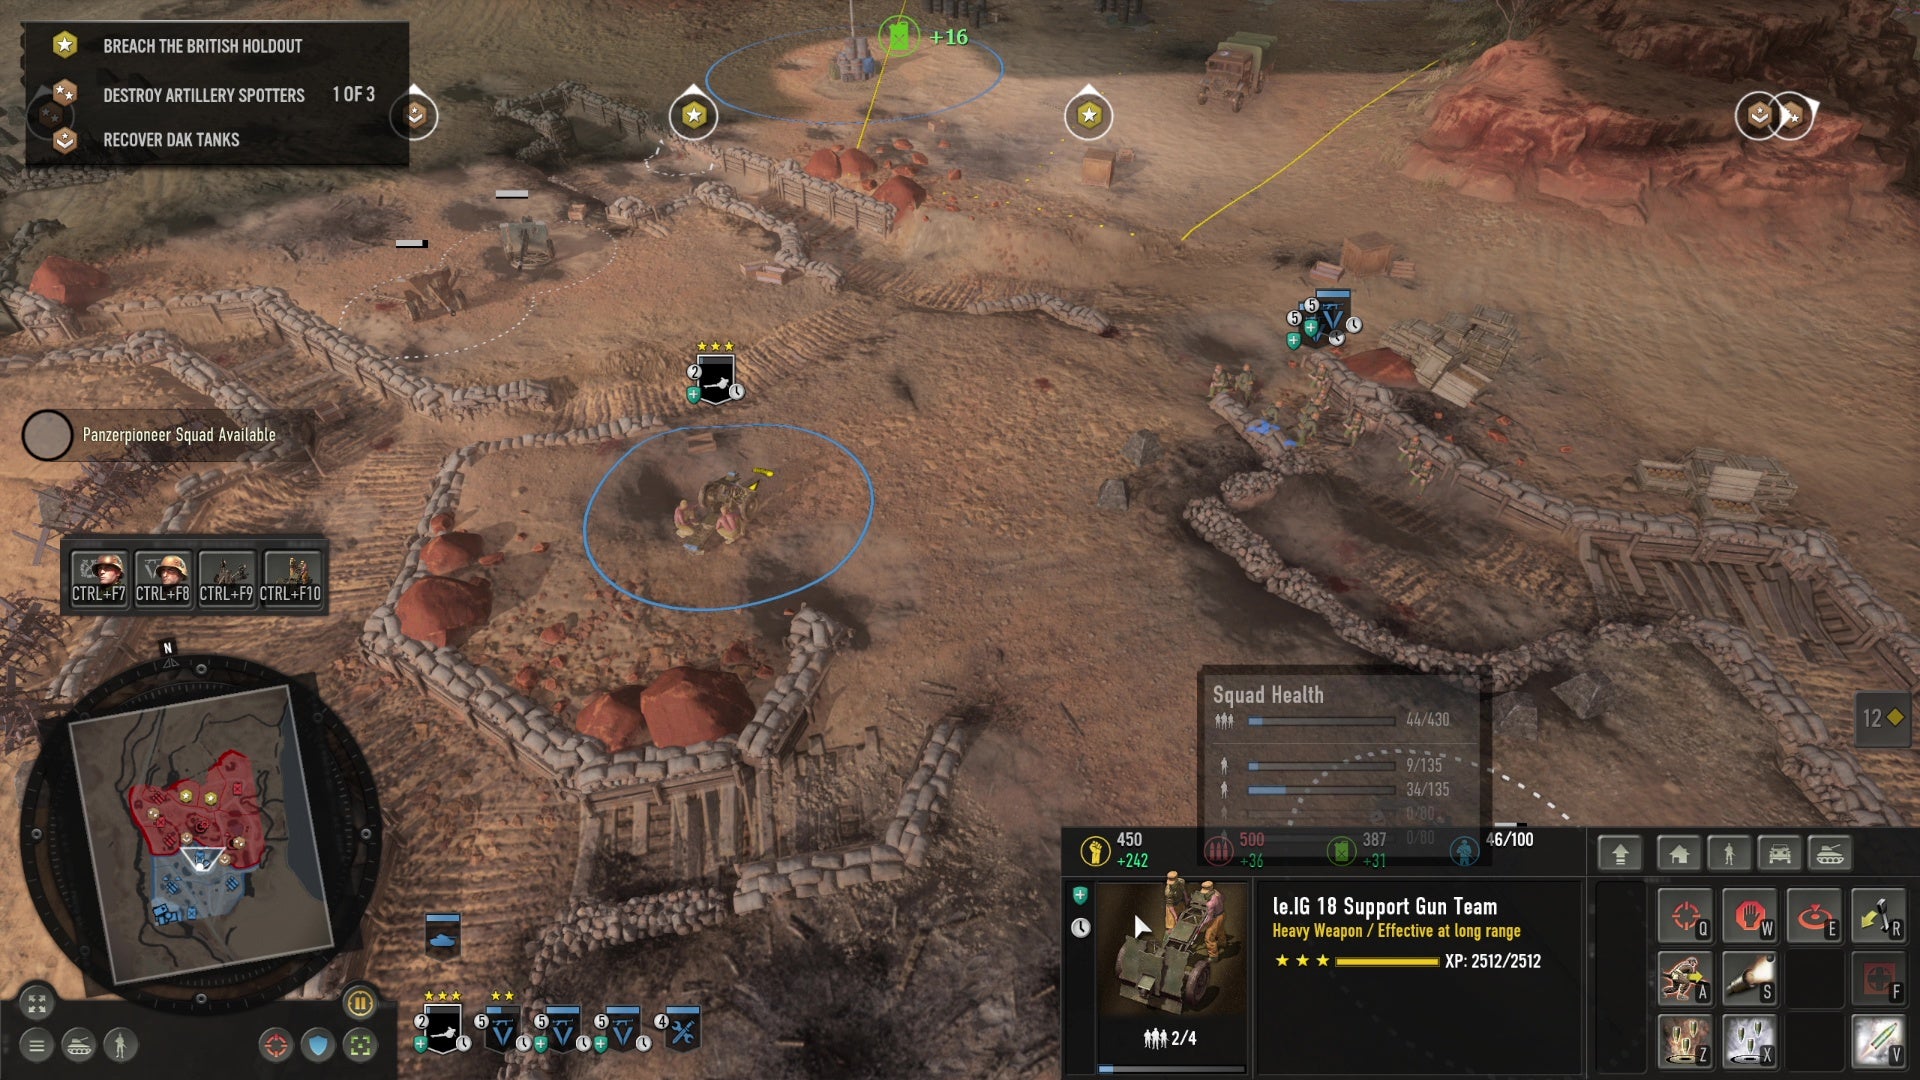 German forces stake out an abandoned camp in Company Of Heroes 3